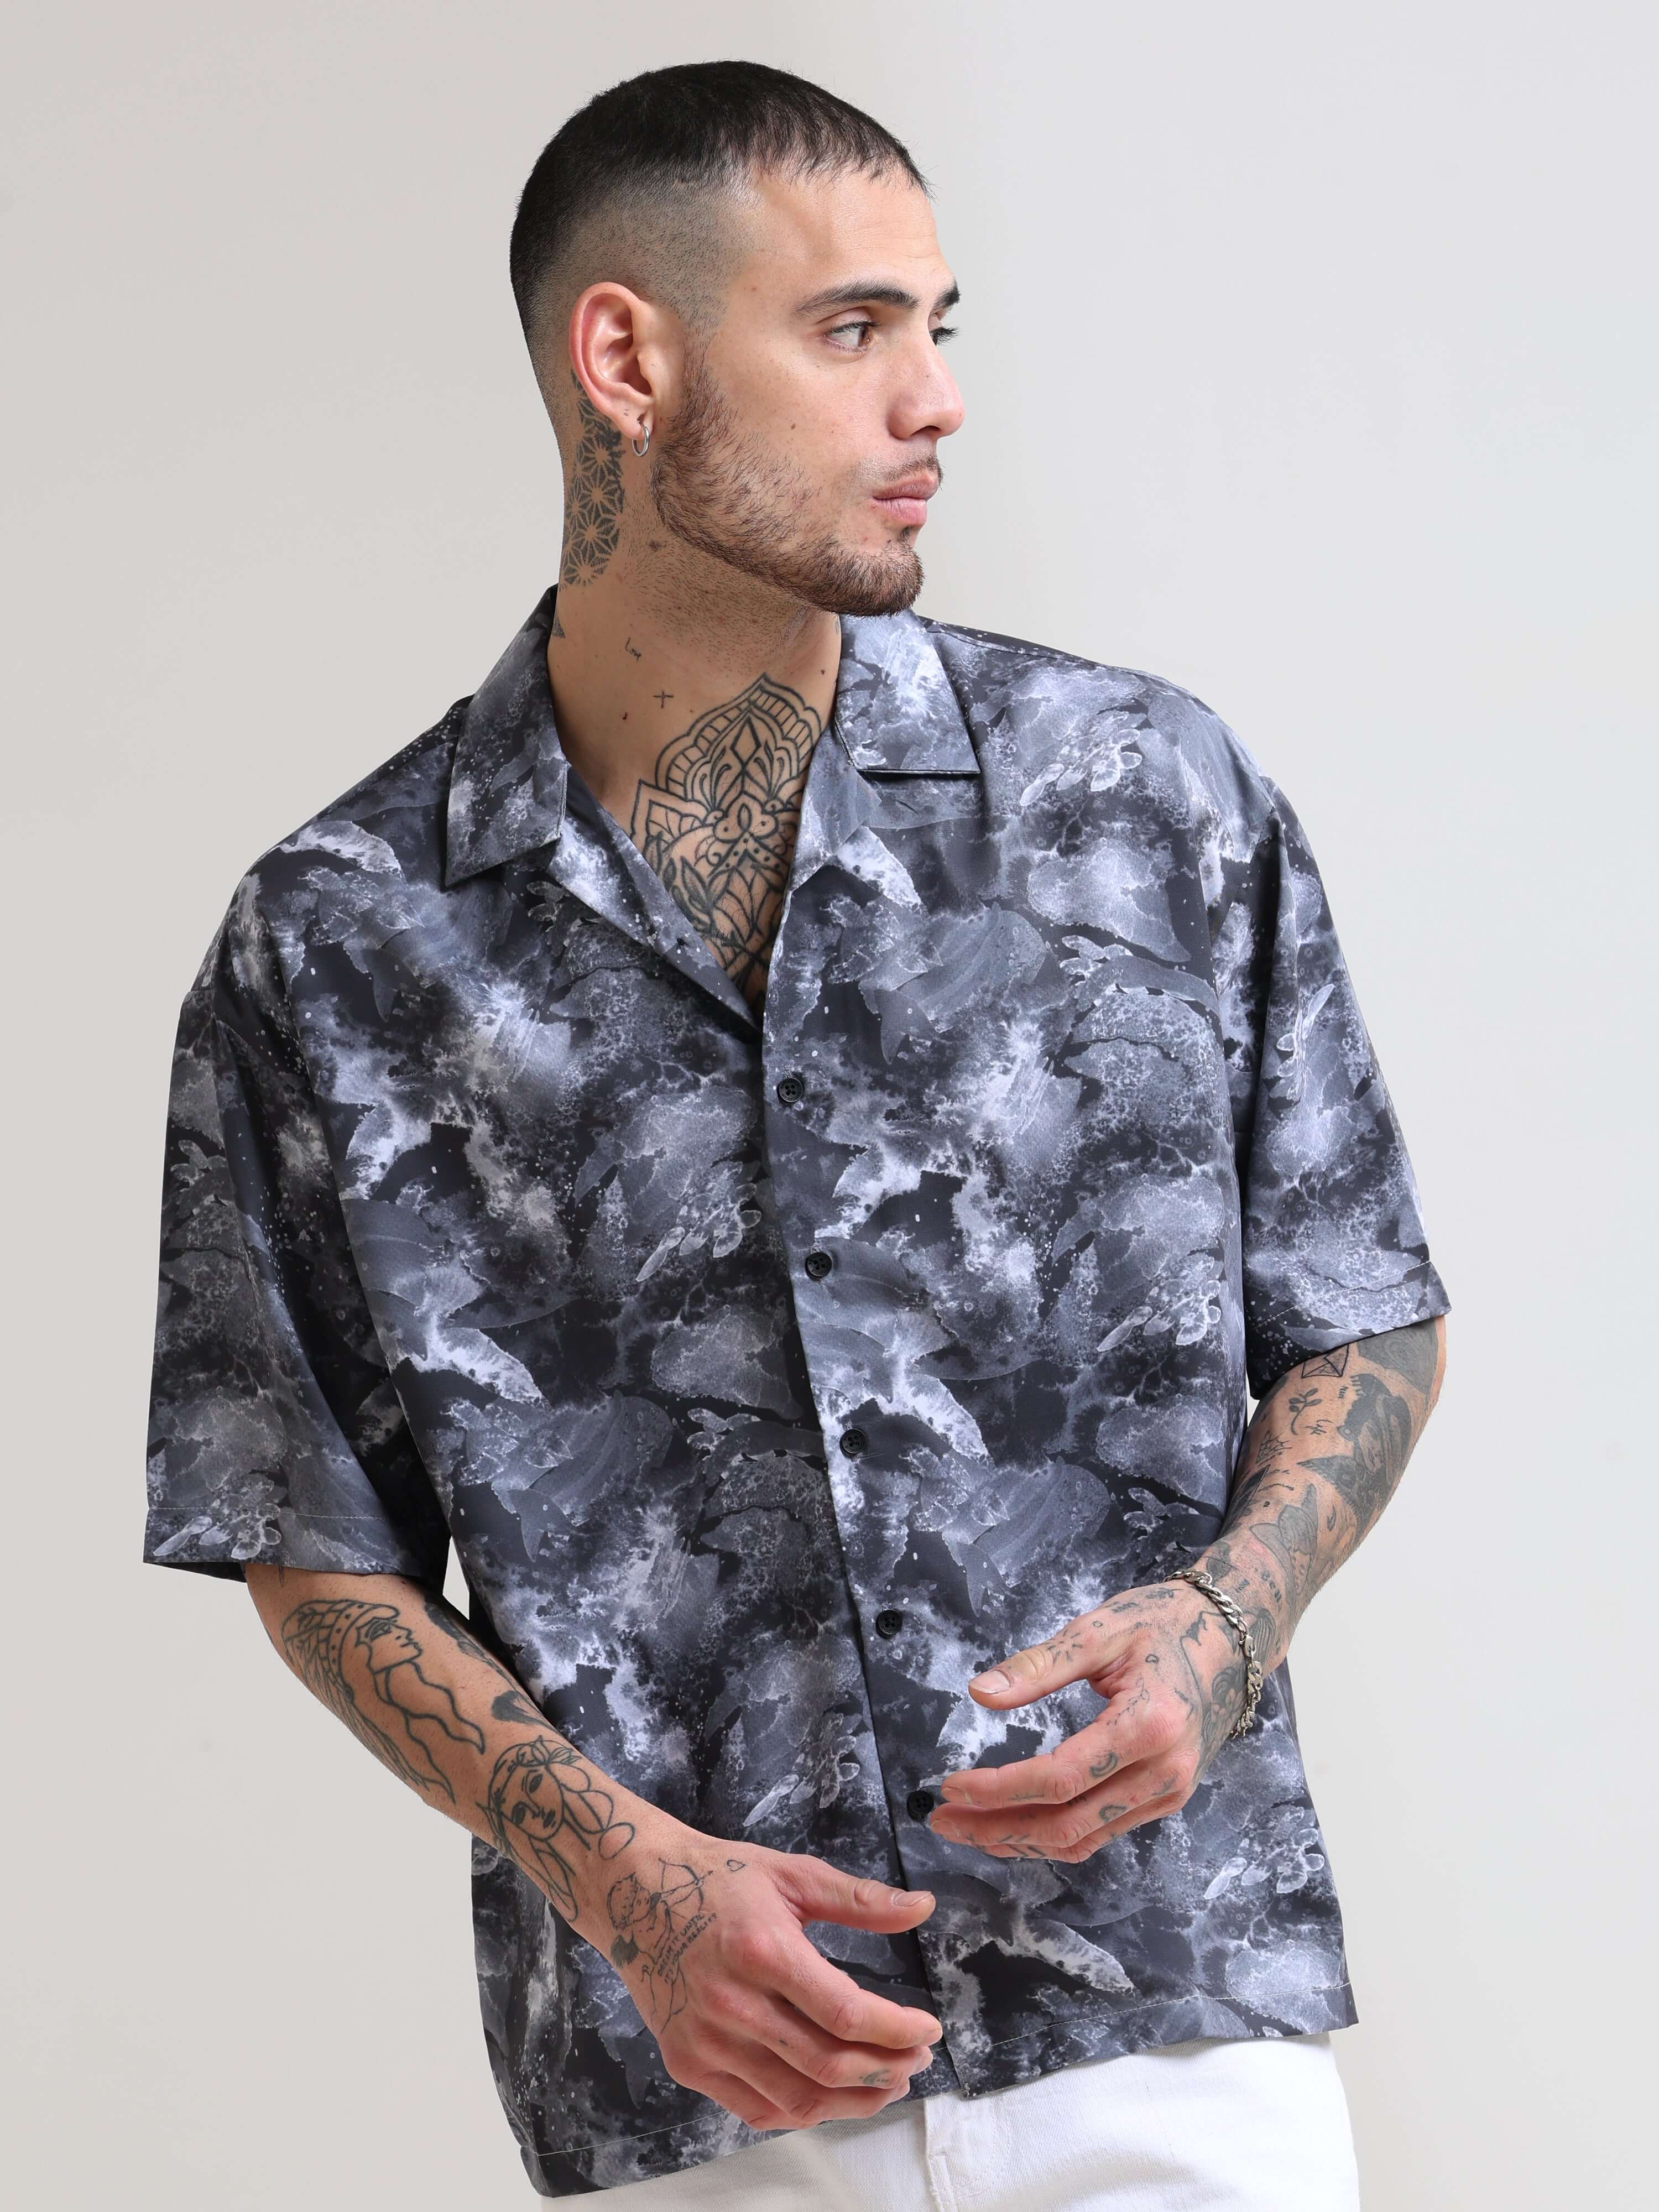 Moonlit Melody Oversized Shirt shop online at Estilocus. Our Moonlit Melody Oversized Shirt is perfect for those Hawaiian days. The relaxed fit and lightweight fabric make it comfortable to wear all day. Its classic style is perfect for those summer stree